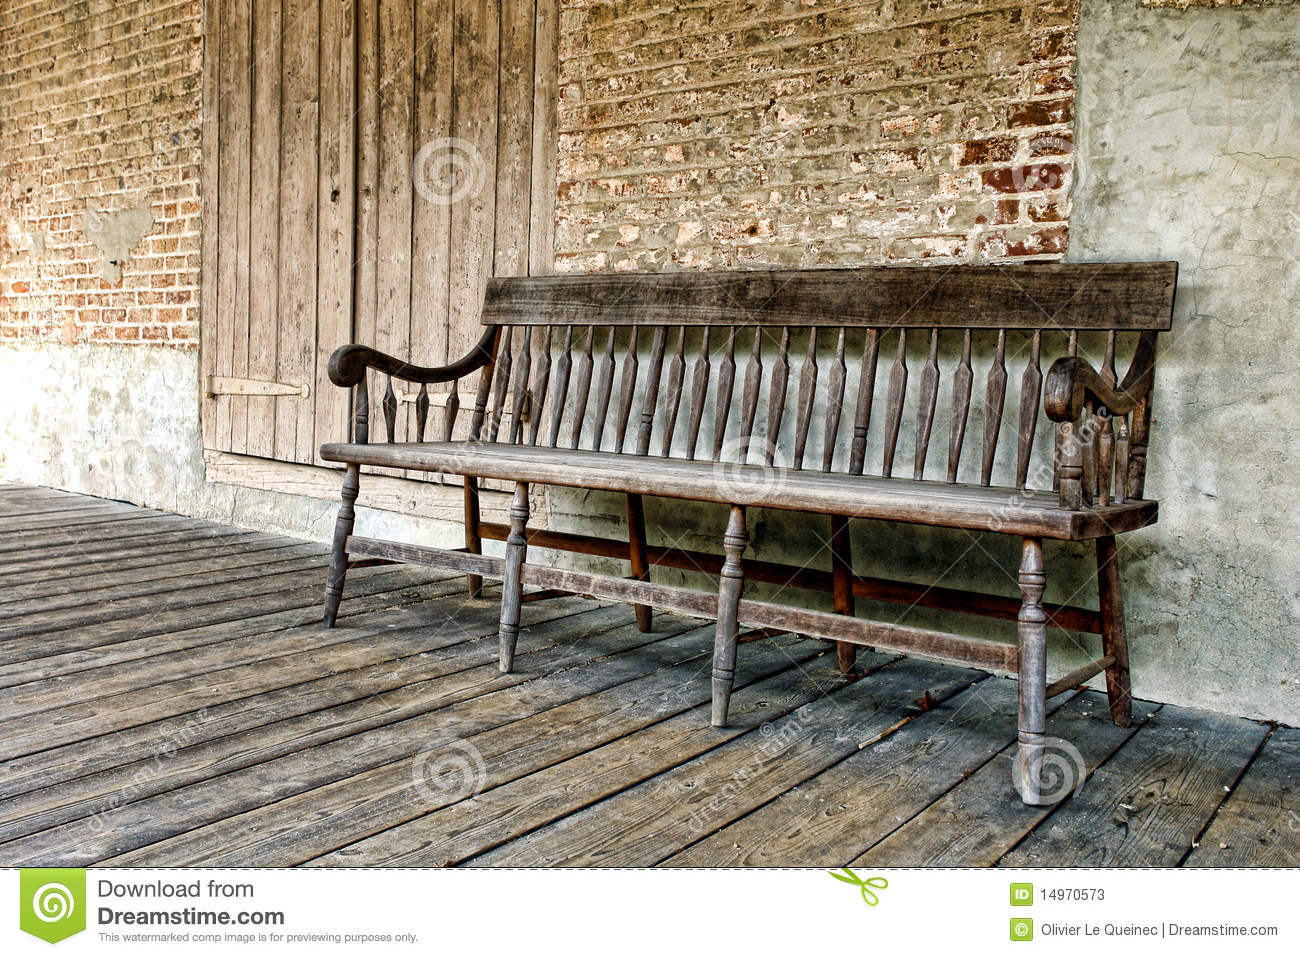 Old Wood Bench On A Historic House Porch Stock Photos   Image